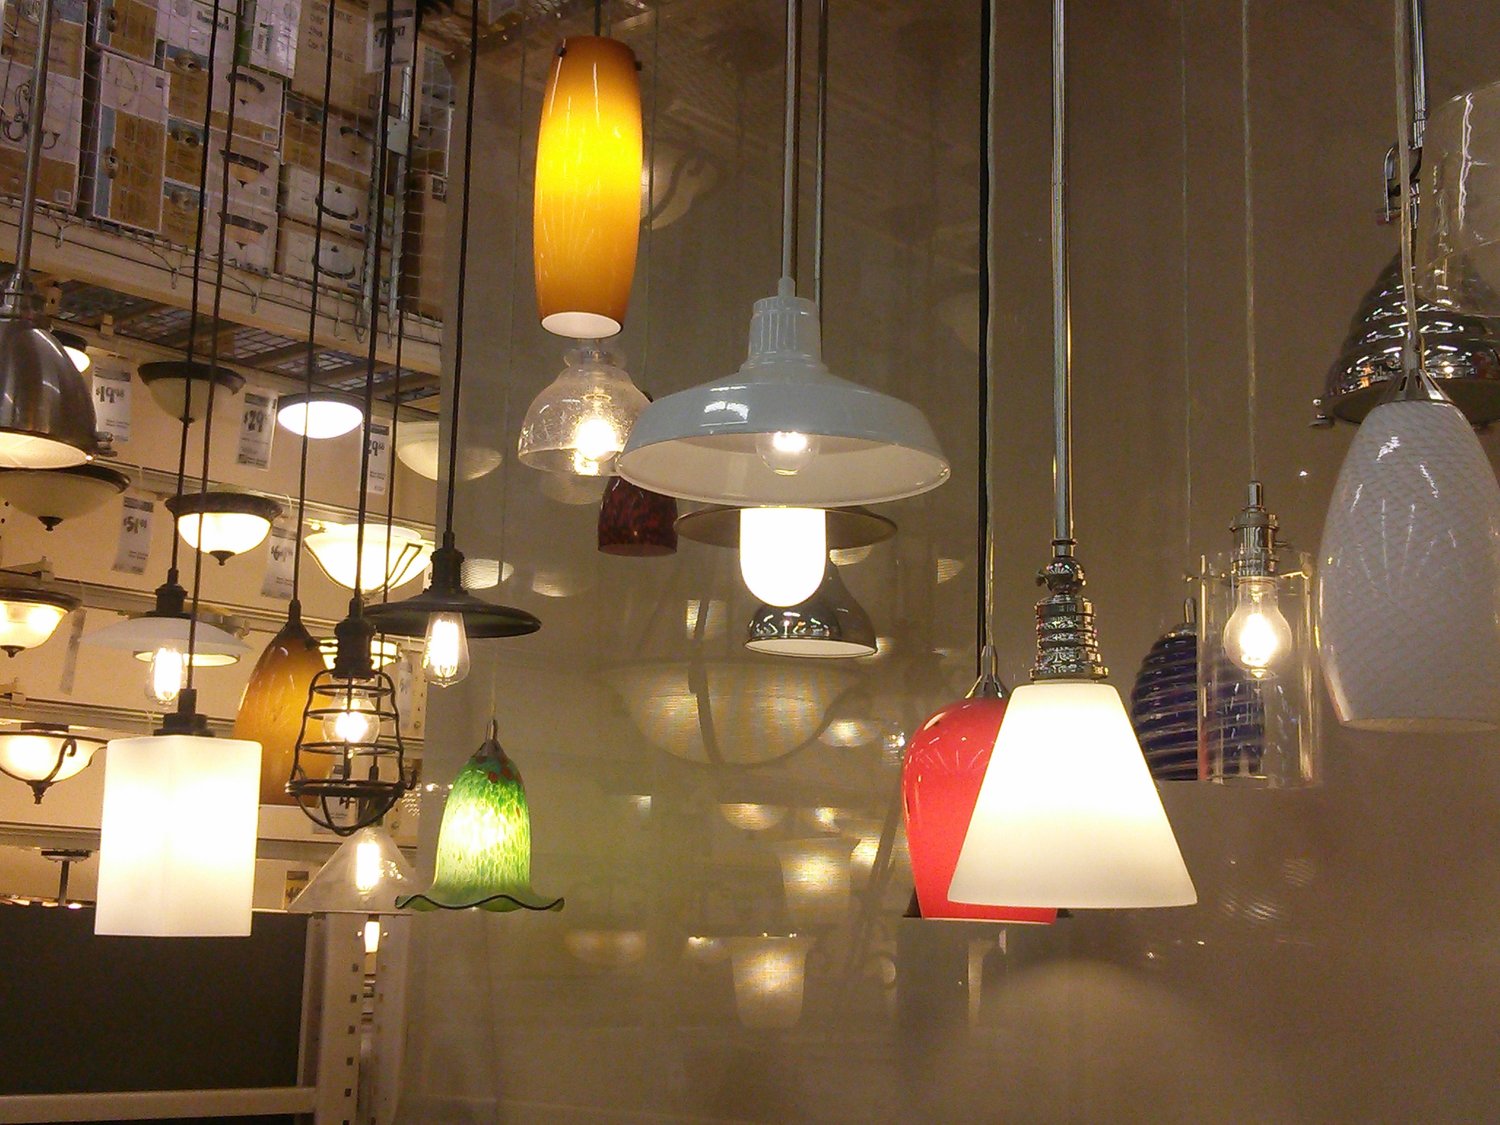 Pendant lighting exposes more light to the room and brightens the space. Licensed under CC0.